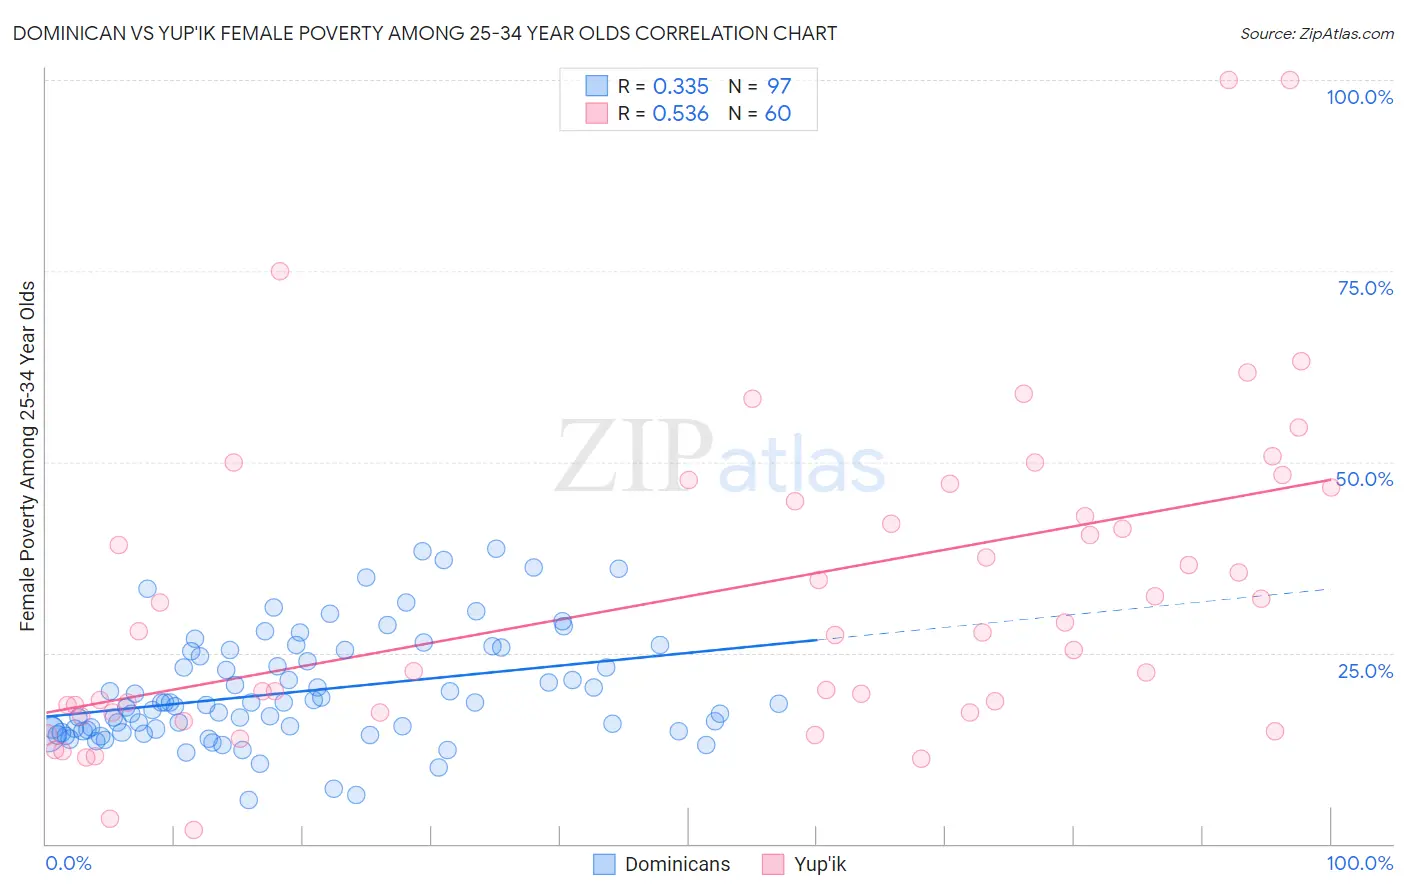 Dominican vs Yup'ik Female Poverty Among 25-34 Year Olds